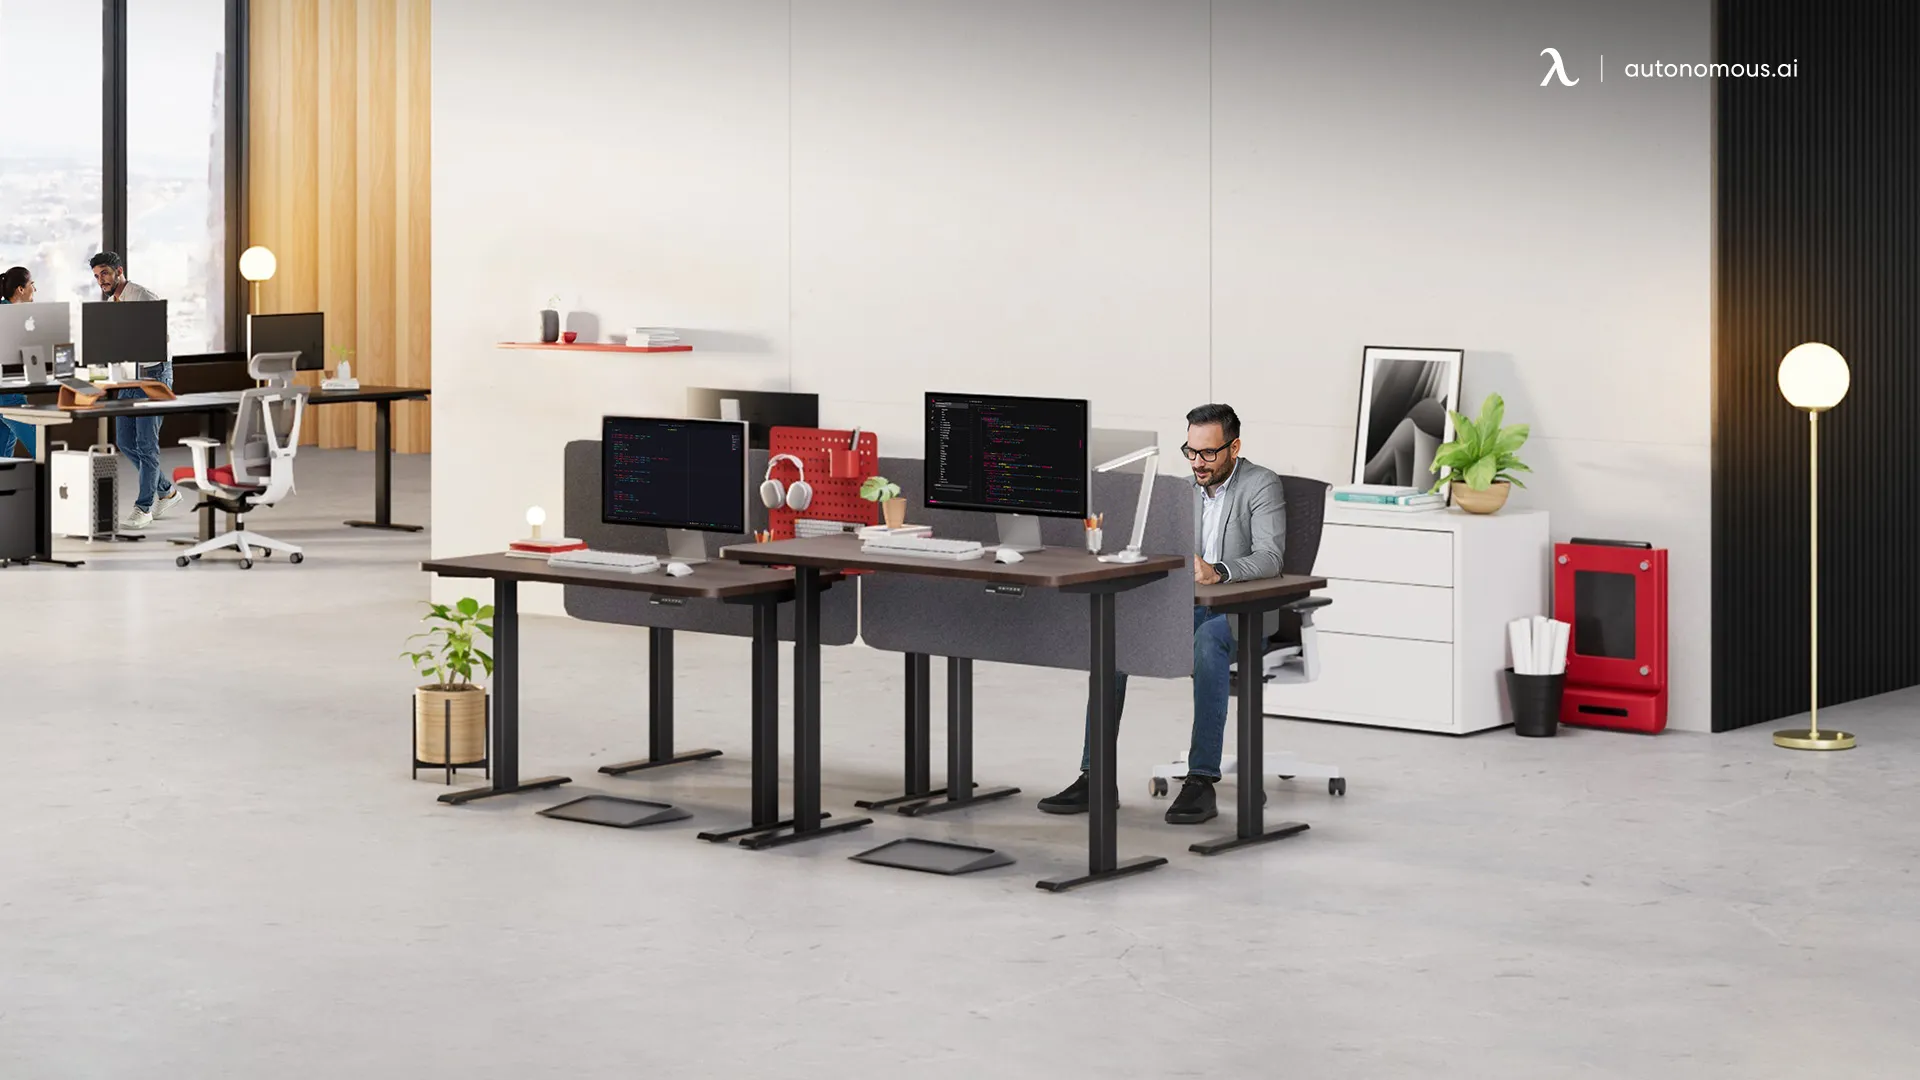 Additional Considerations for Electric or Motorized Standing Desks